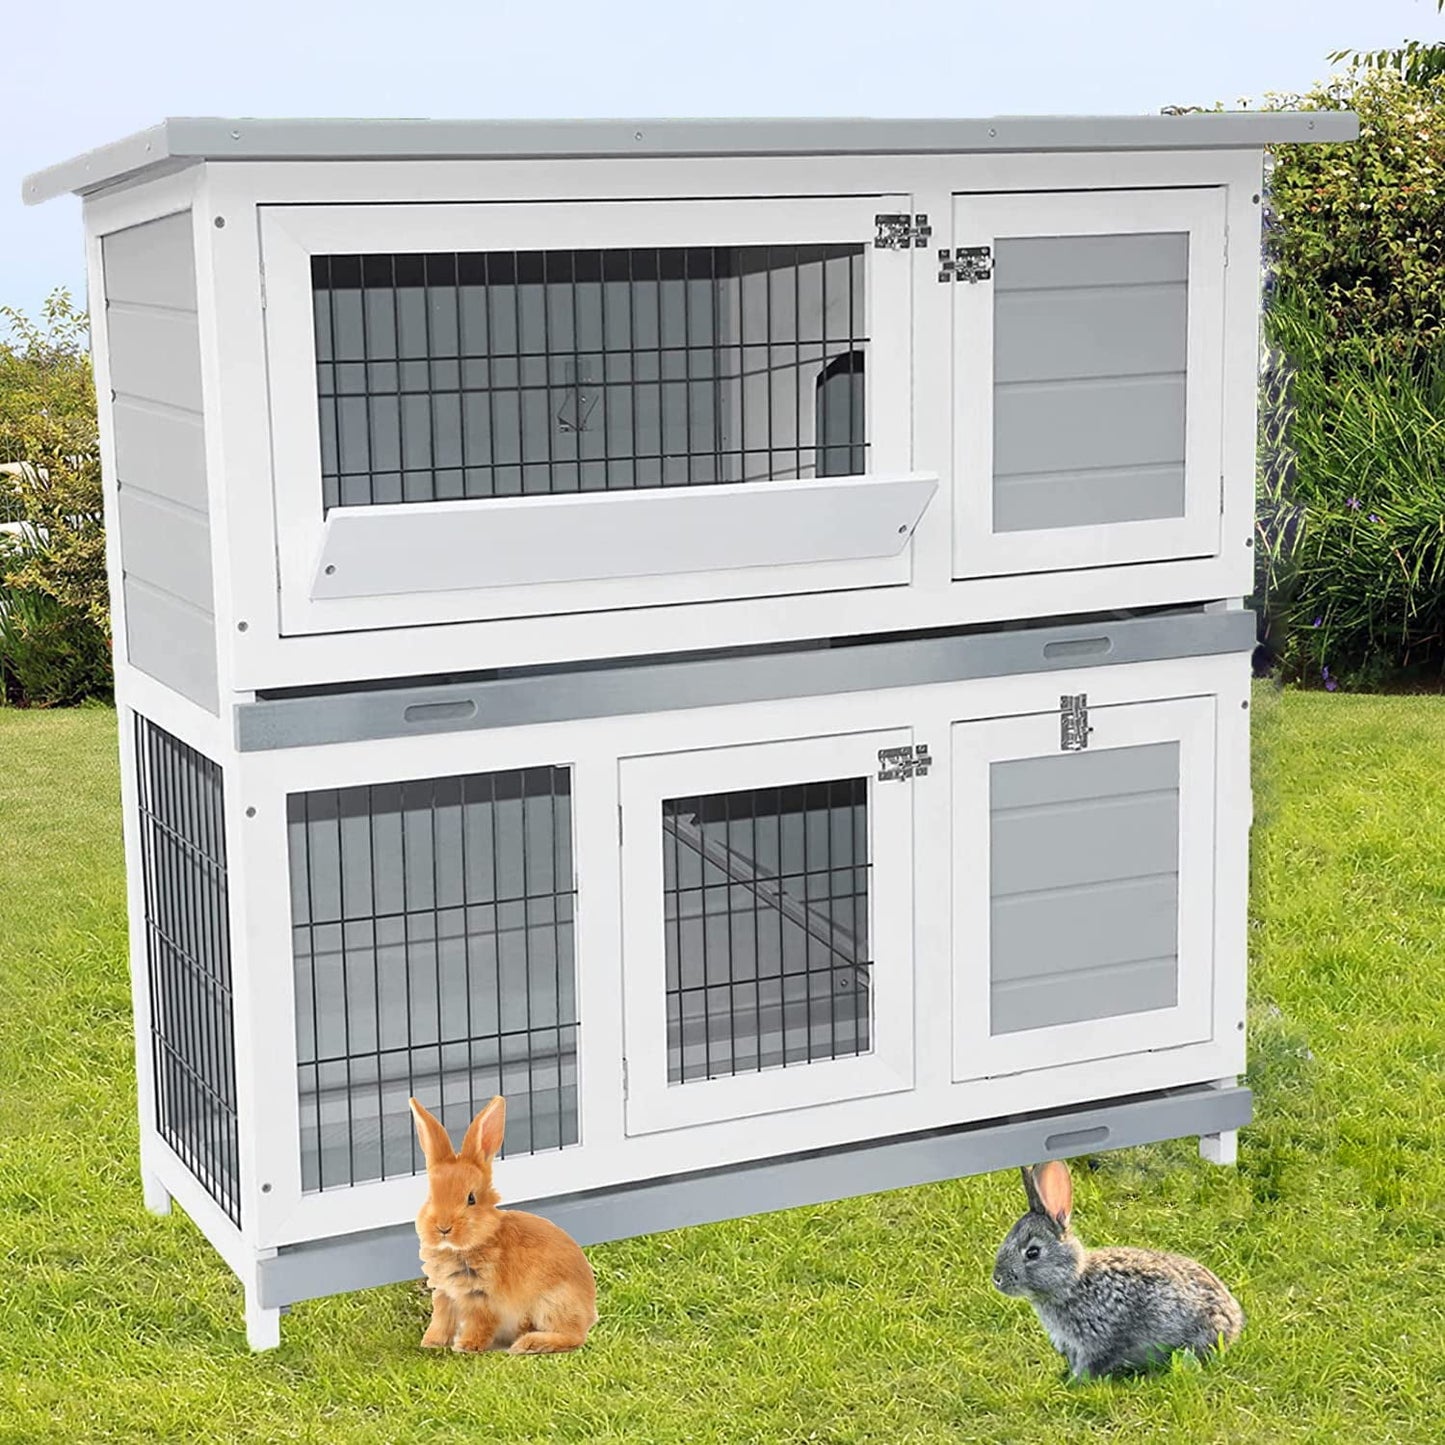 Arlopu 42.3" Rabbit Hutch, Wooden Bunny Cage Chicken Coop, Outdoor Backyard Bunny House, 2-Story Cage for Small Animals